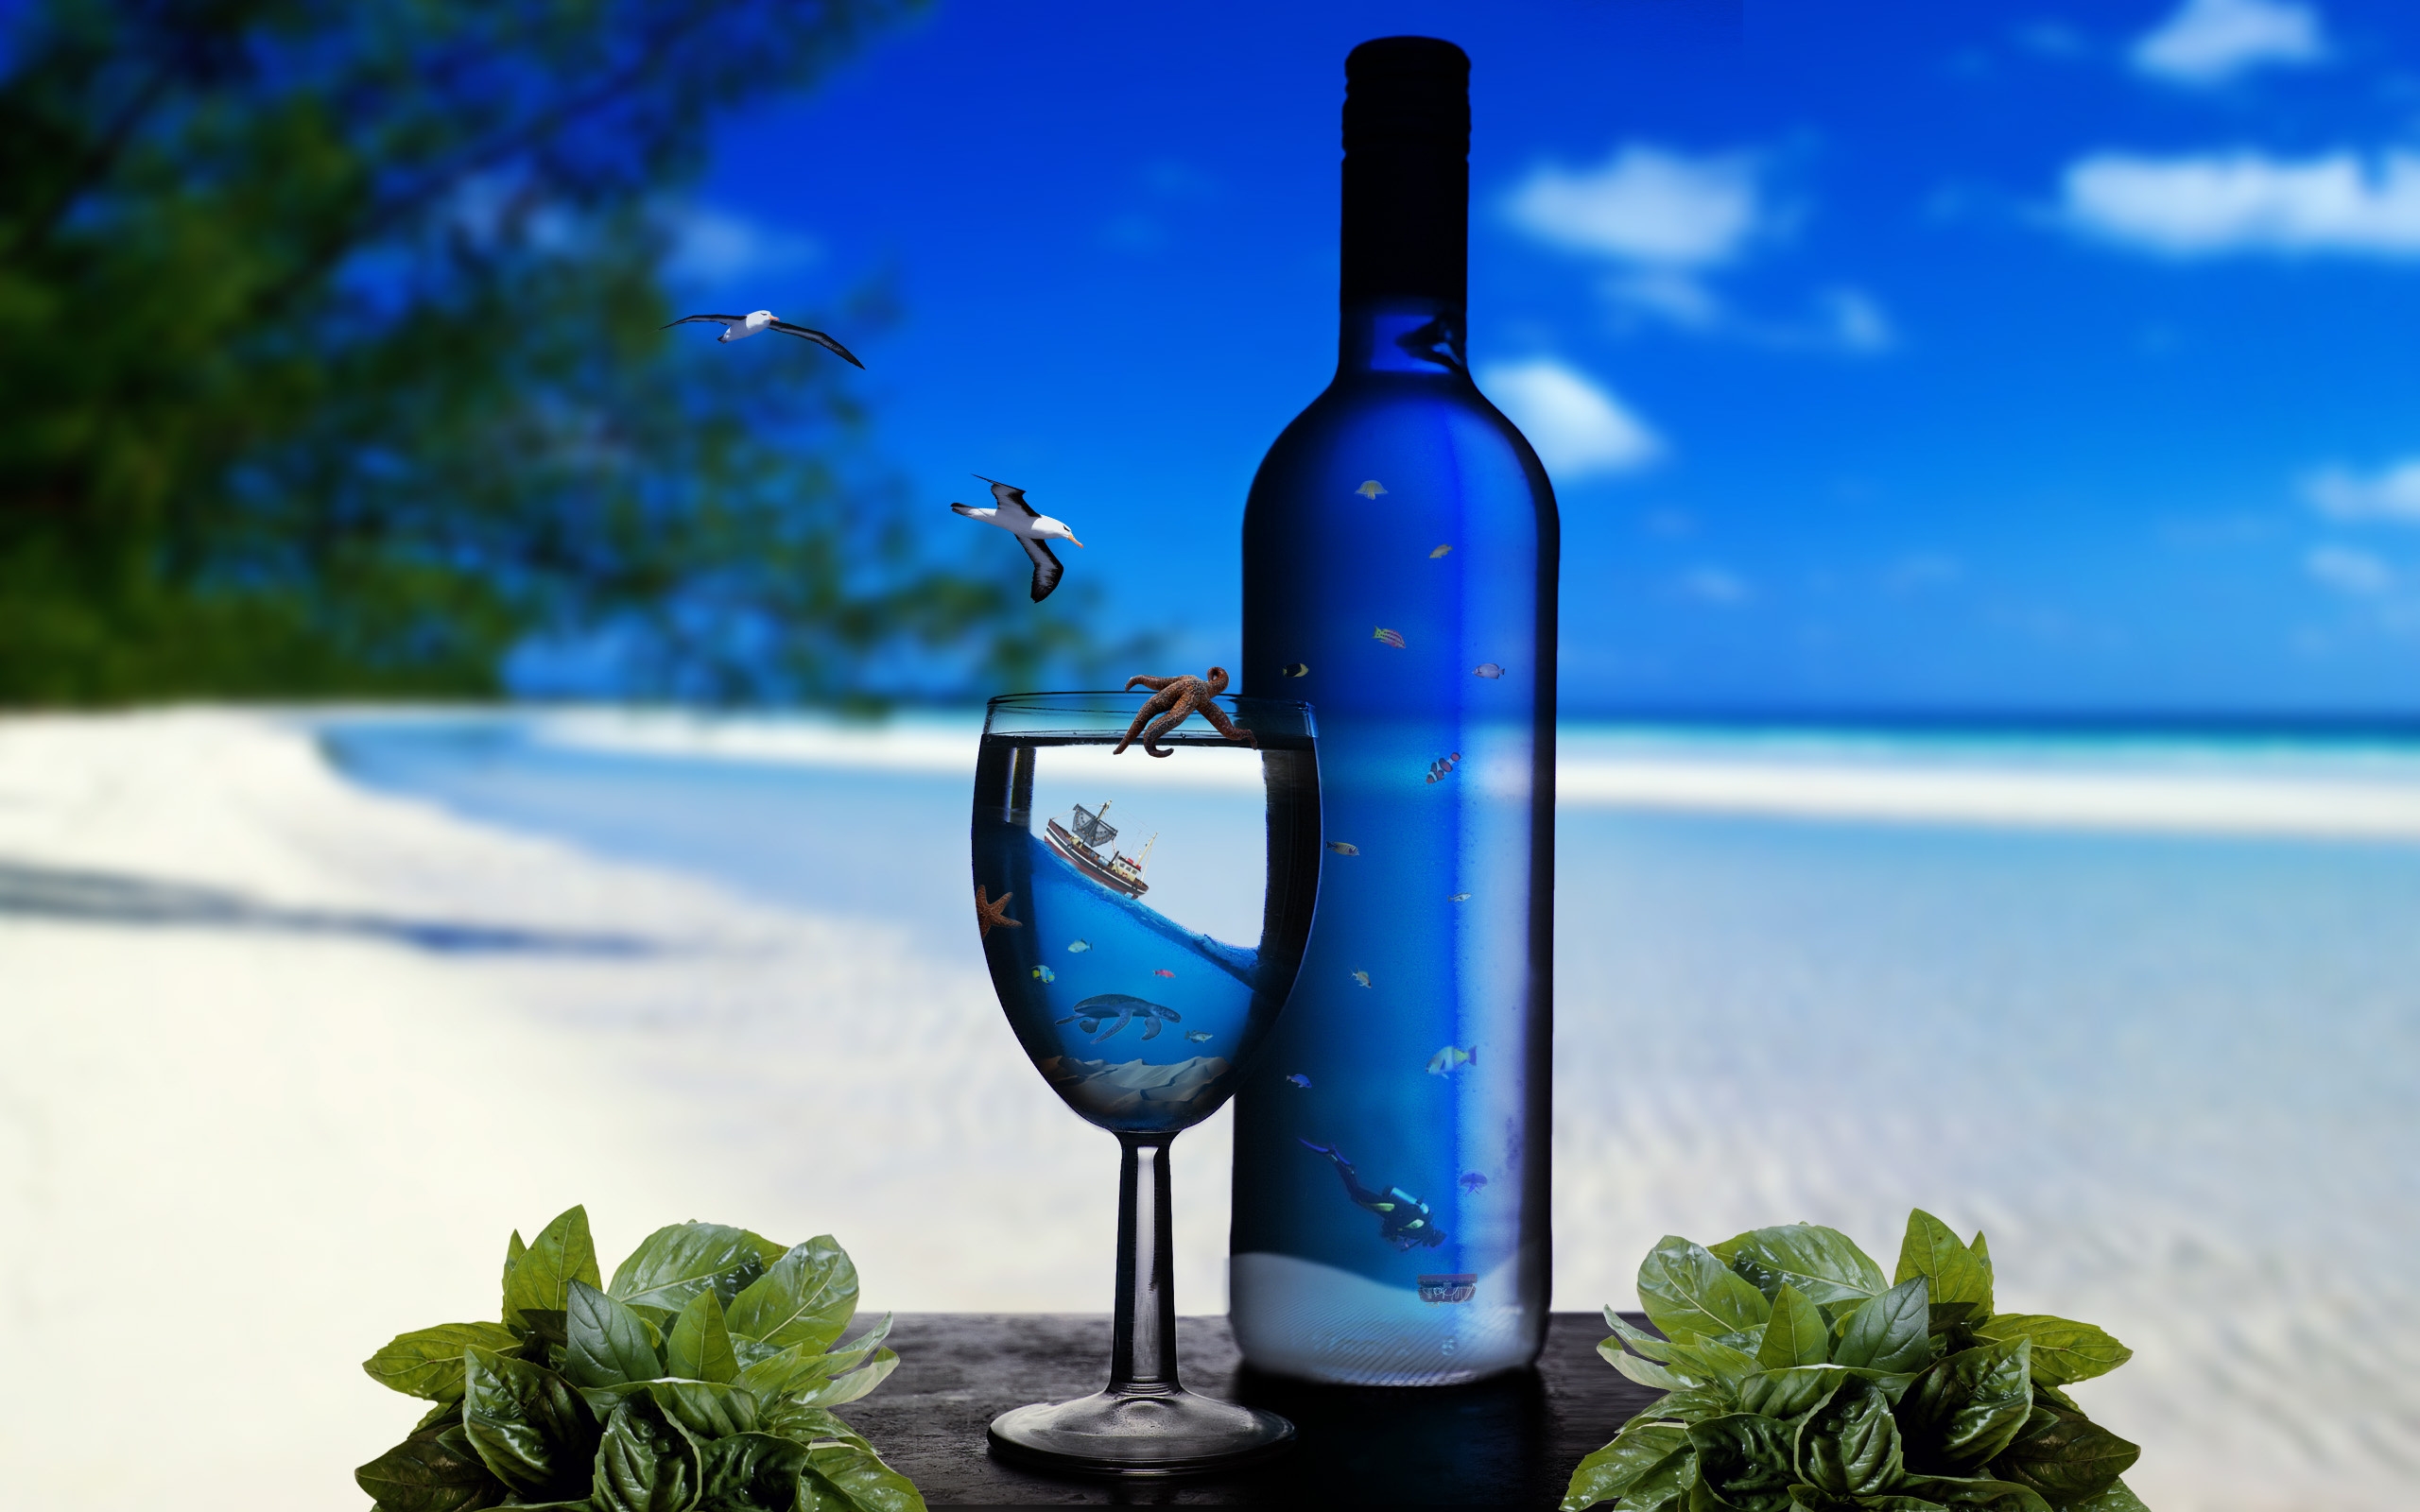 Sea World in a Bottle and Glass widescreen wallpaper. Wide